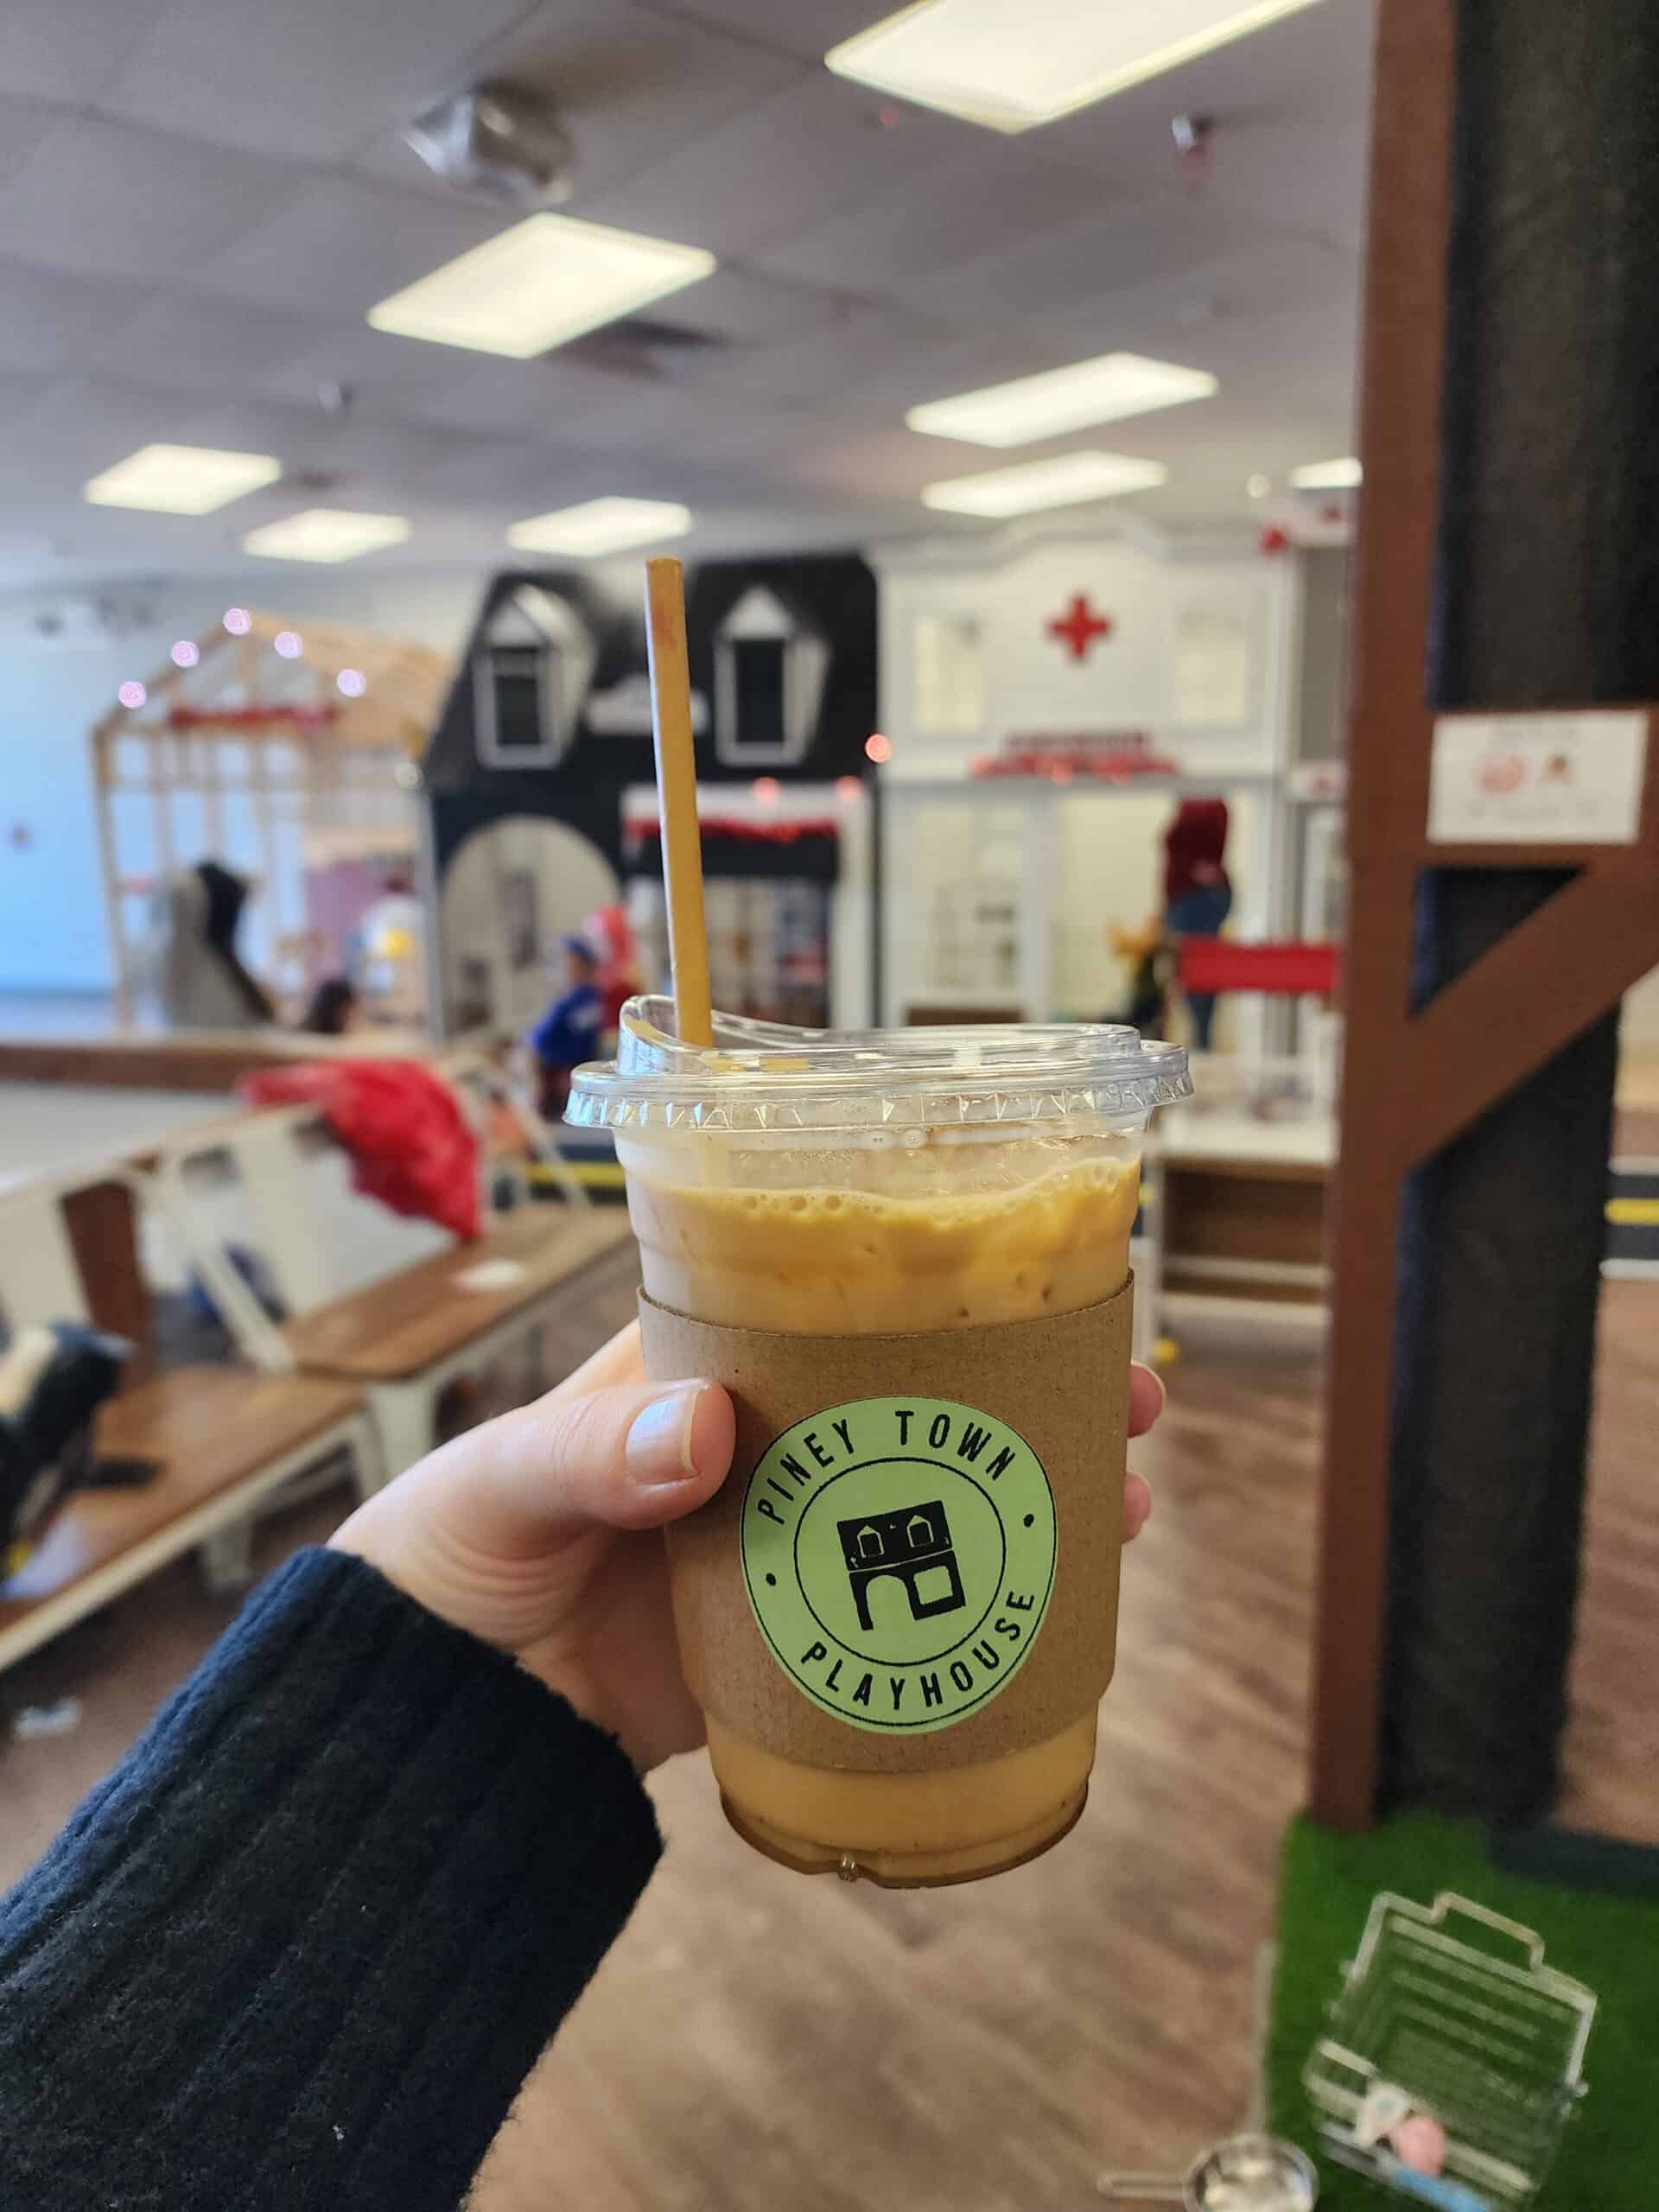 Close-up of a hand holding a Piney Town Playhouse branded iced coffee cup with a paper straw, in focus against a blurred background of the playful indoor town setting in Fuquay-Varina, NC